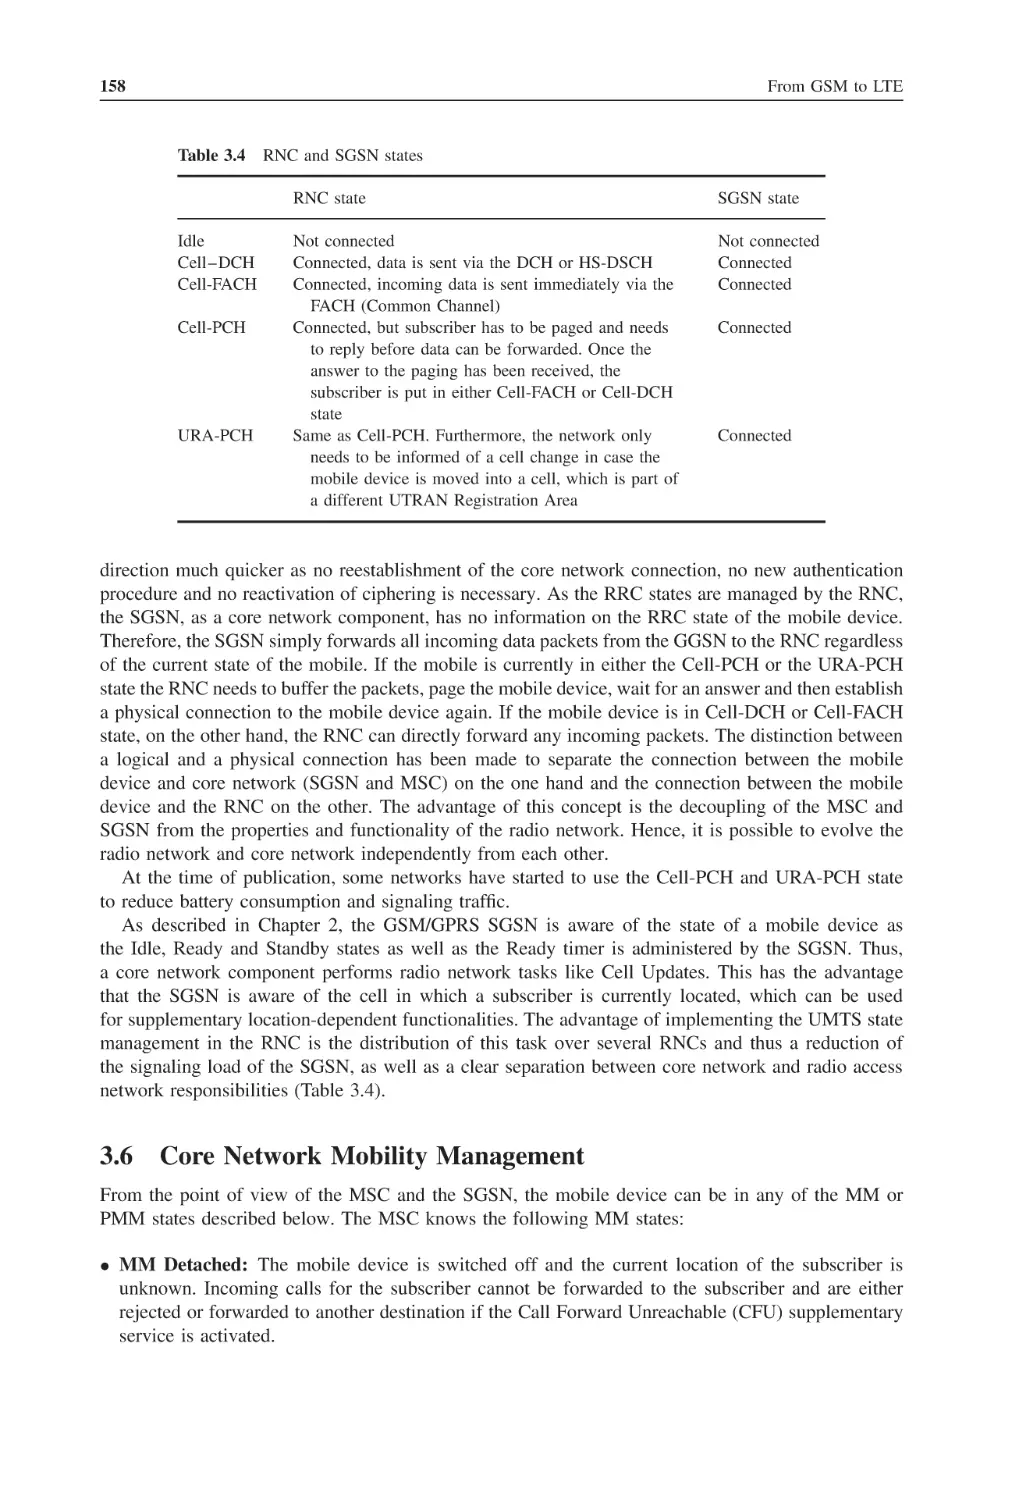 3.6 Core Network Mobility Management